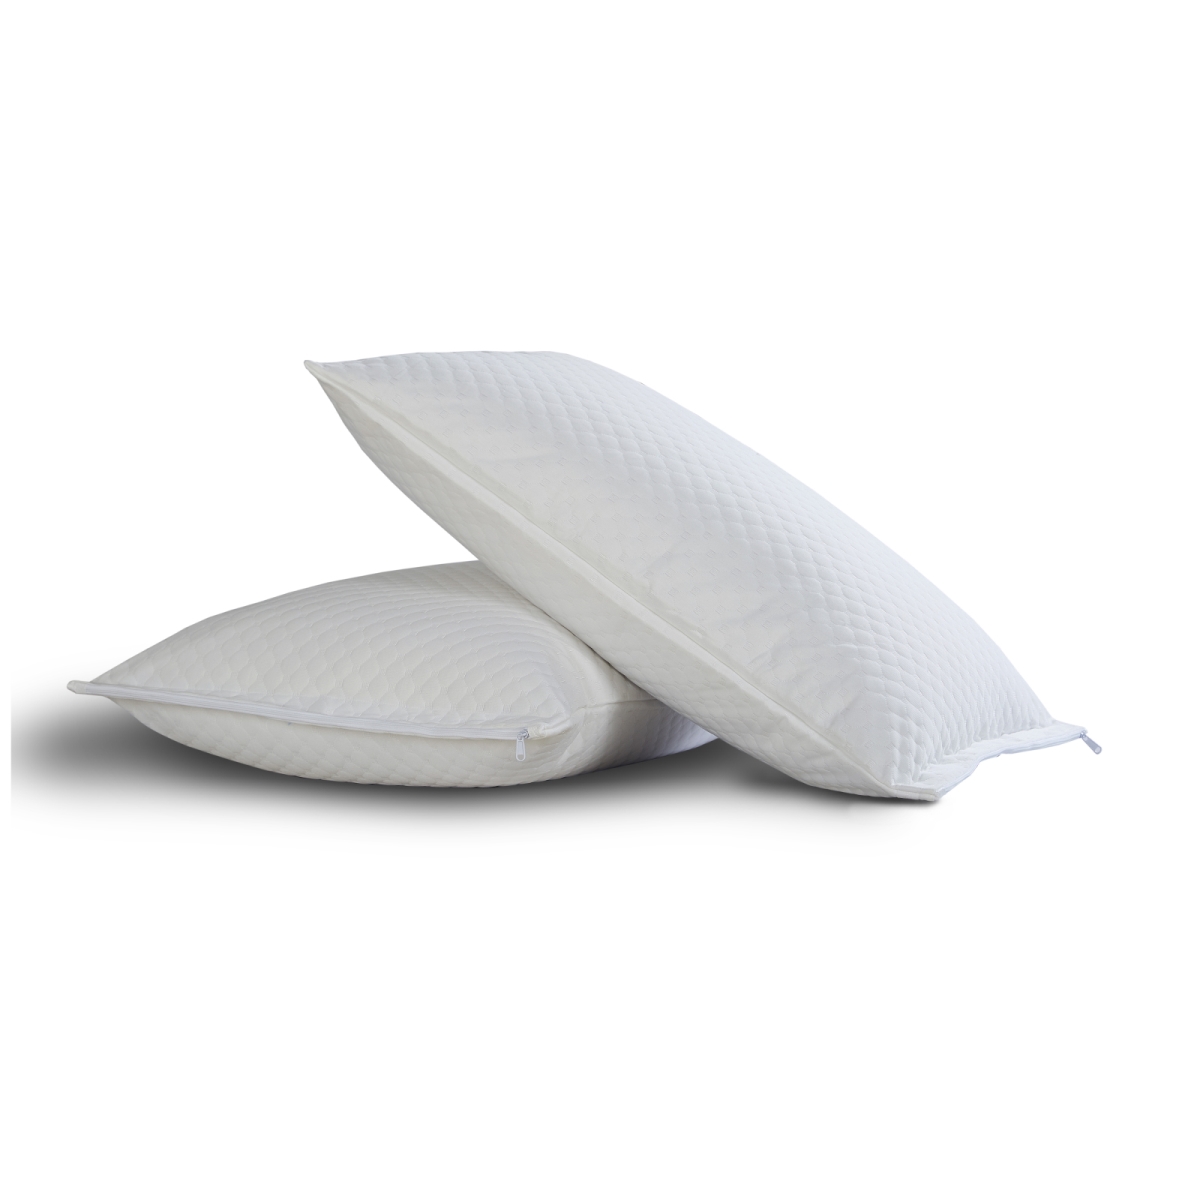 All17102whit09 Comfort Top Pillow Protectors With Bed Bug Blocker, White - Pack Of 2